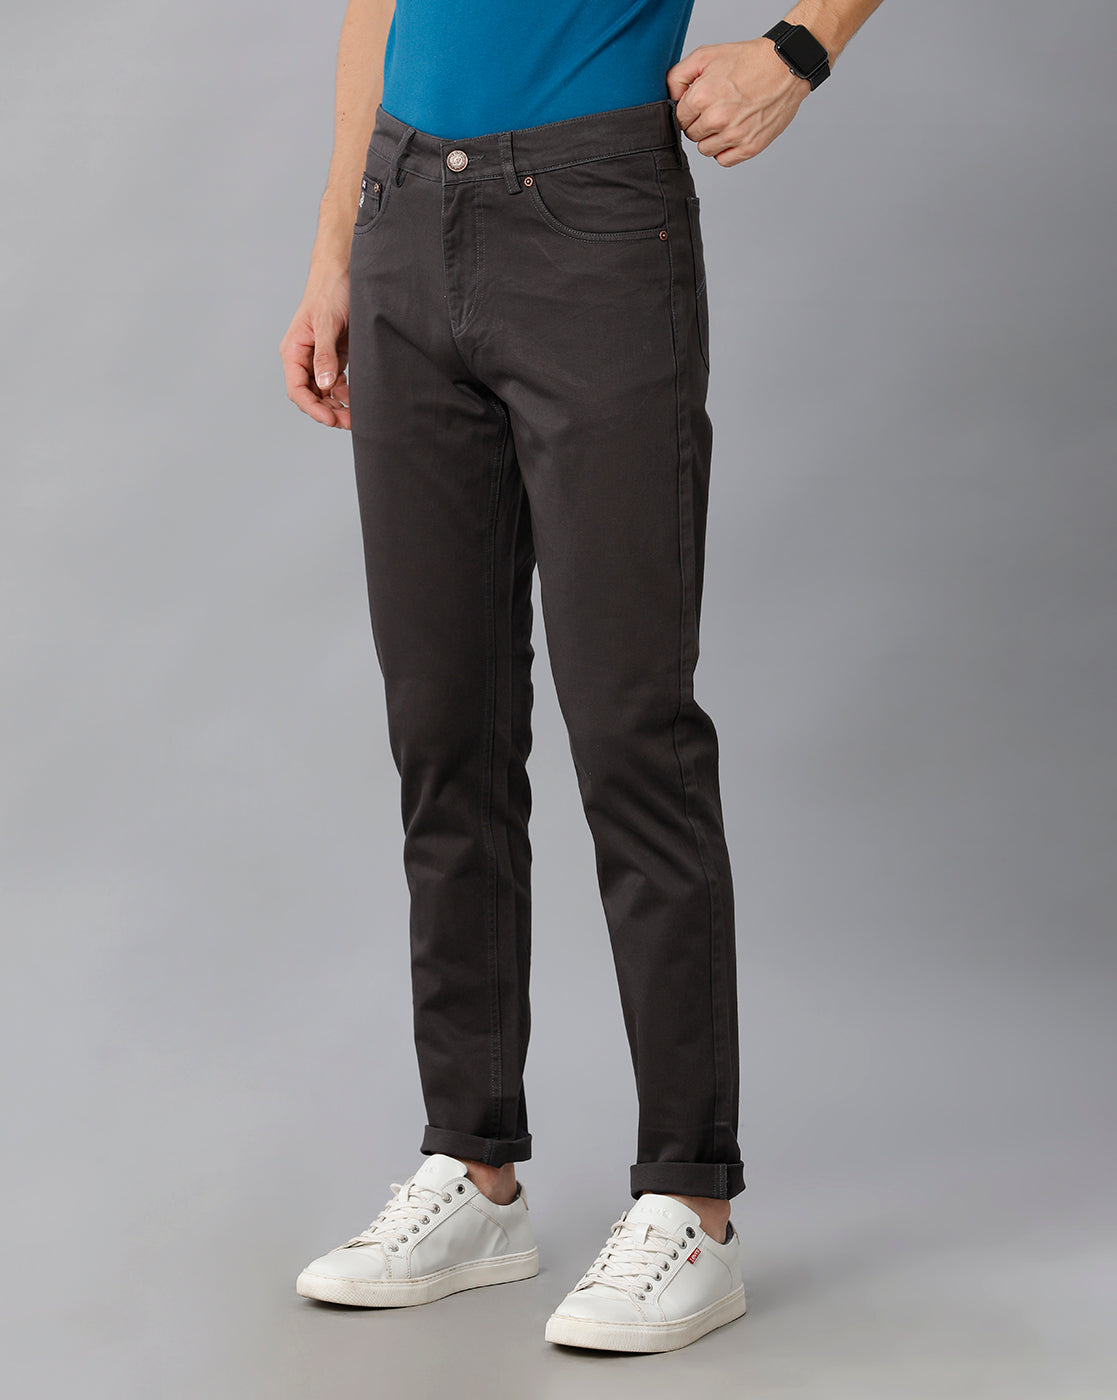 Grey Solid Casual Cotton Trouser